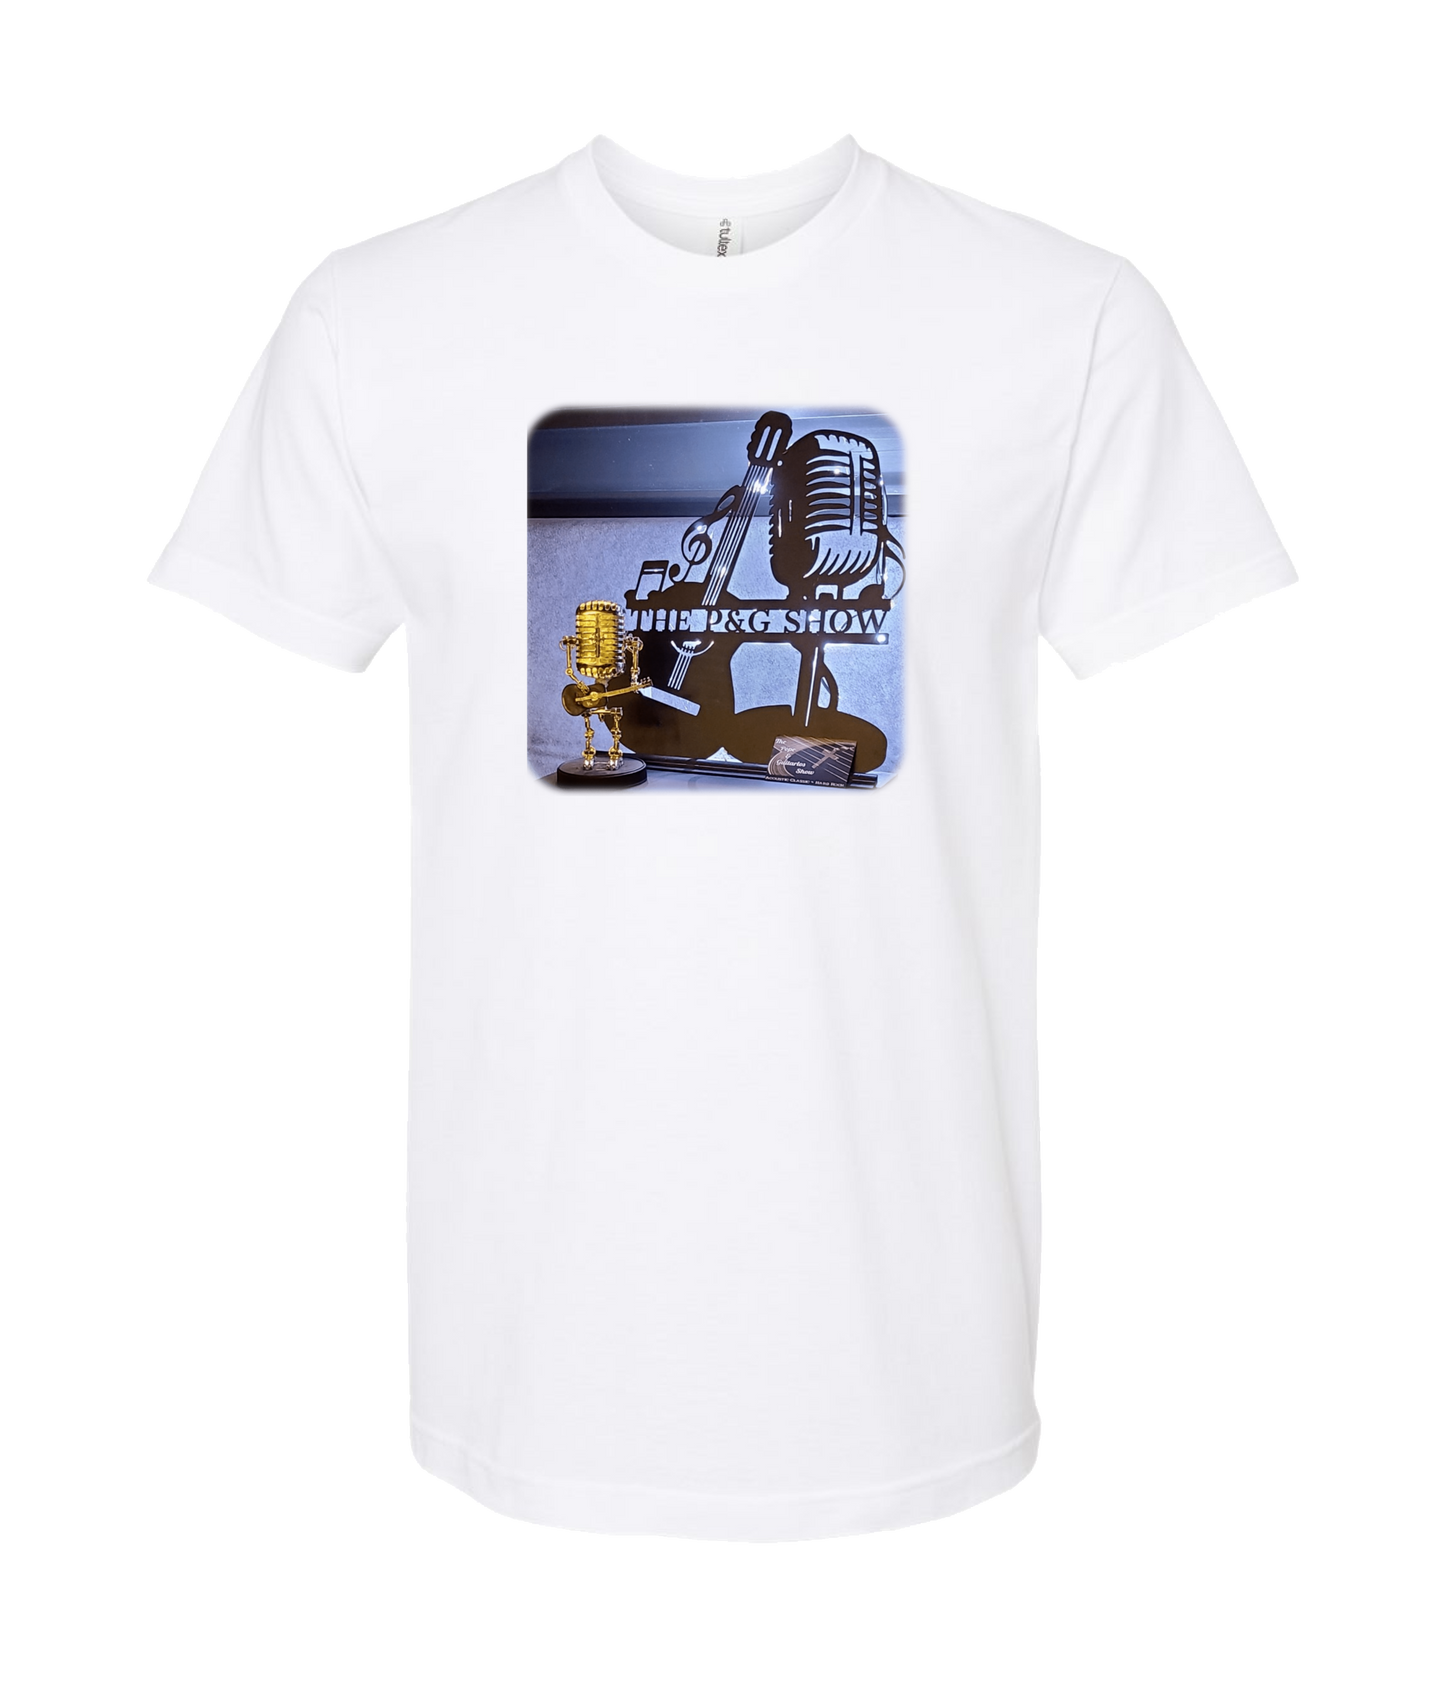 The Pope and Guitarlos Show - Mic Guitar - White T Shirt